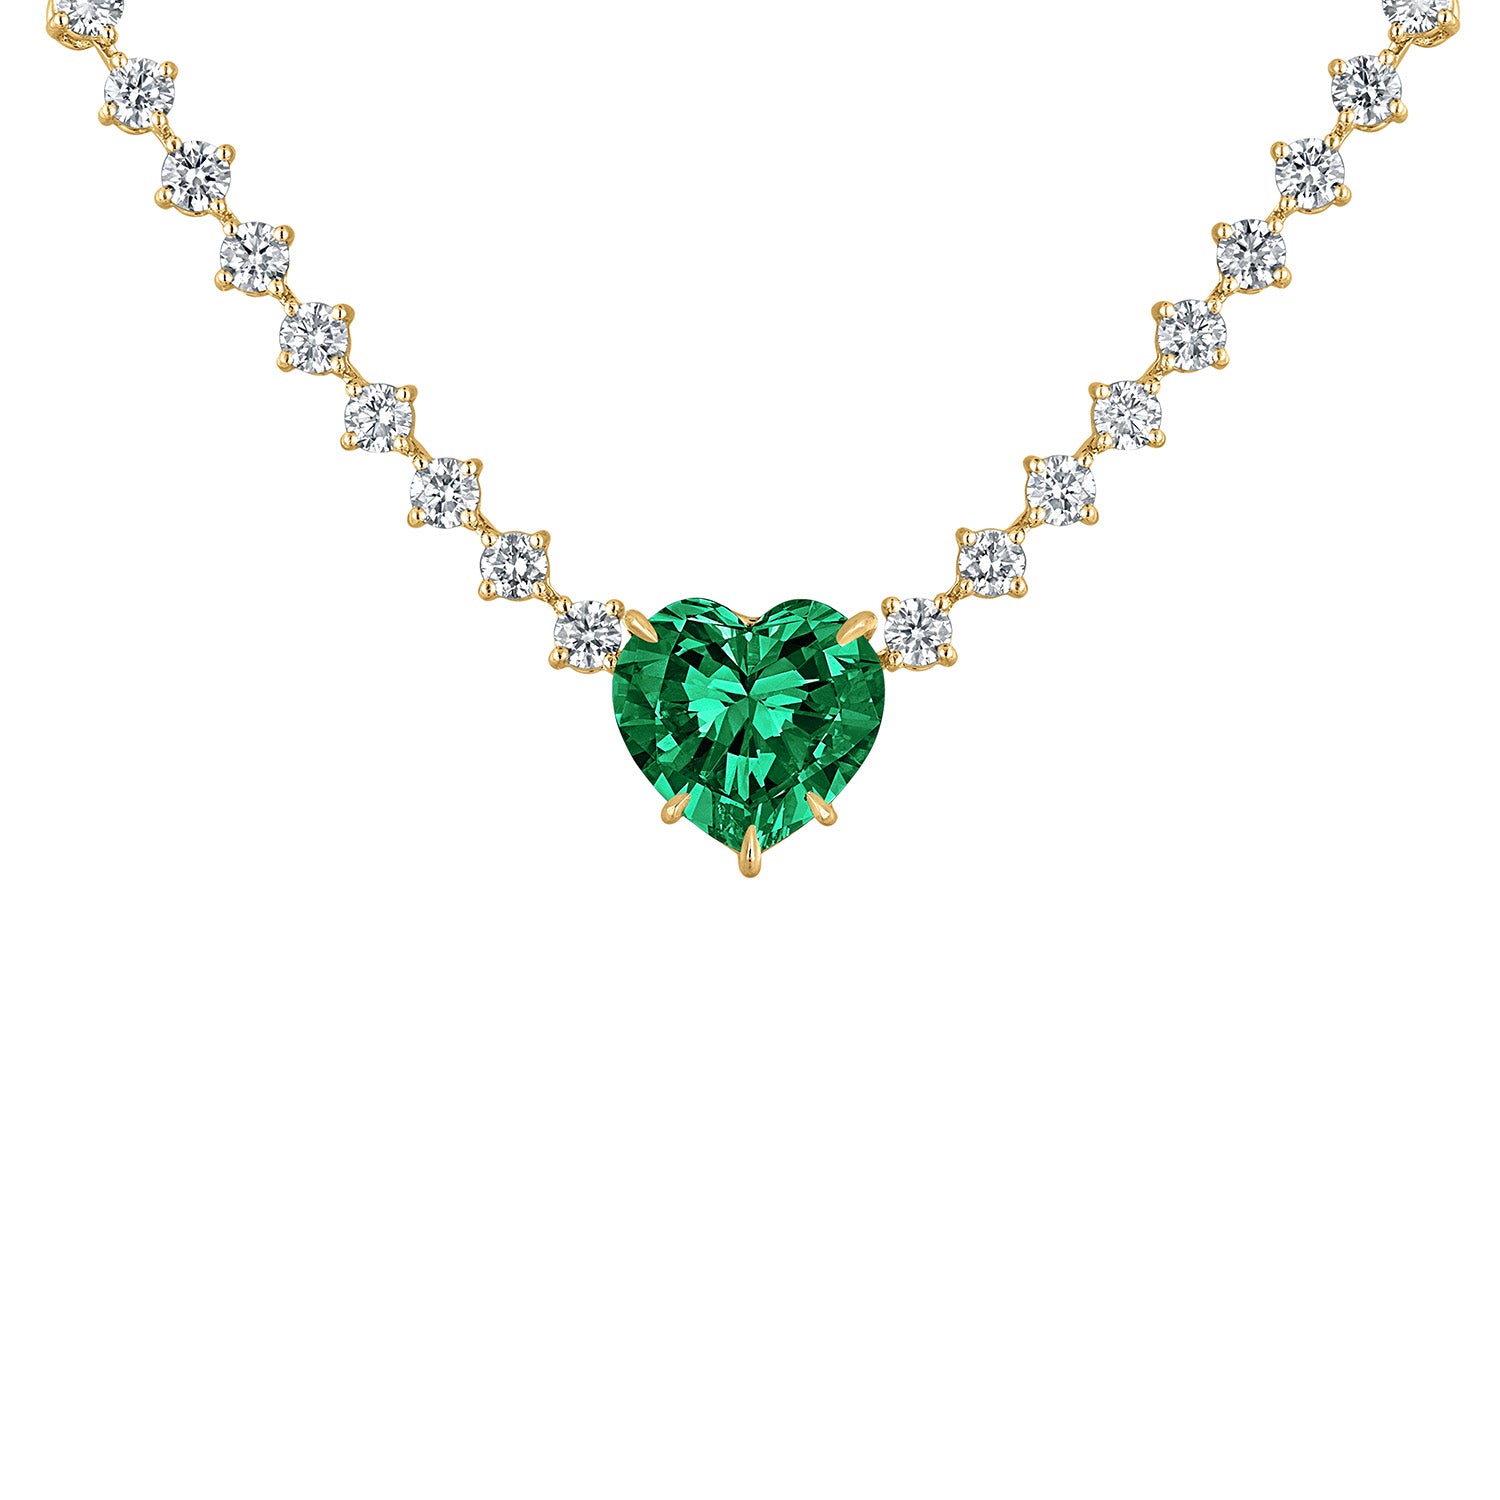 18 karat yellow gold necklace featuring a heart-shaped emerald surrounded by diamonds, offering a stunning contrast and luxurious appeal.